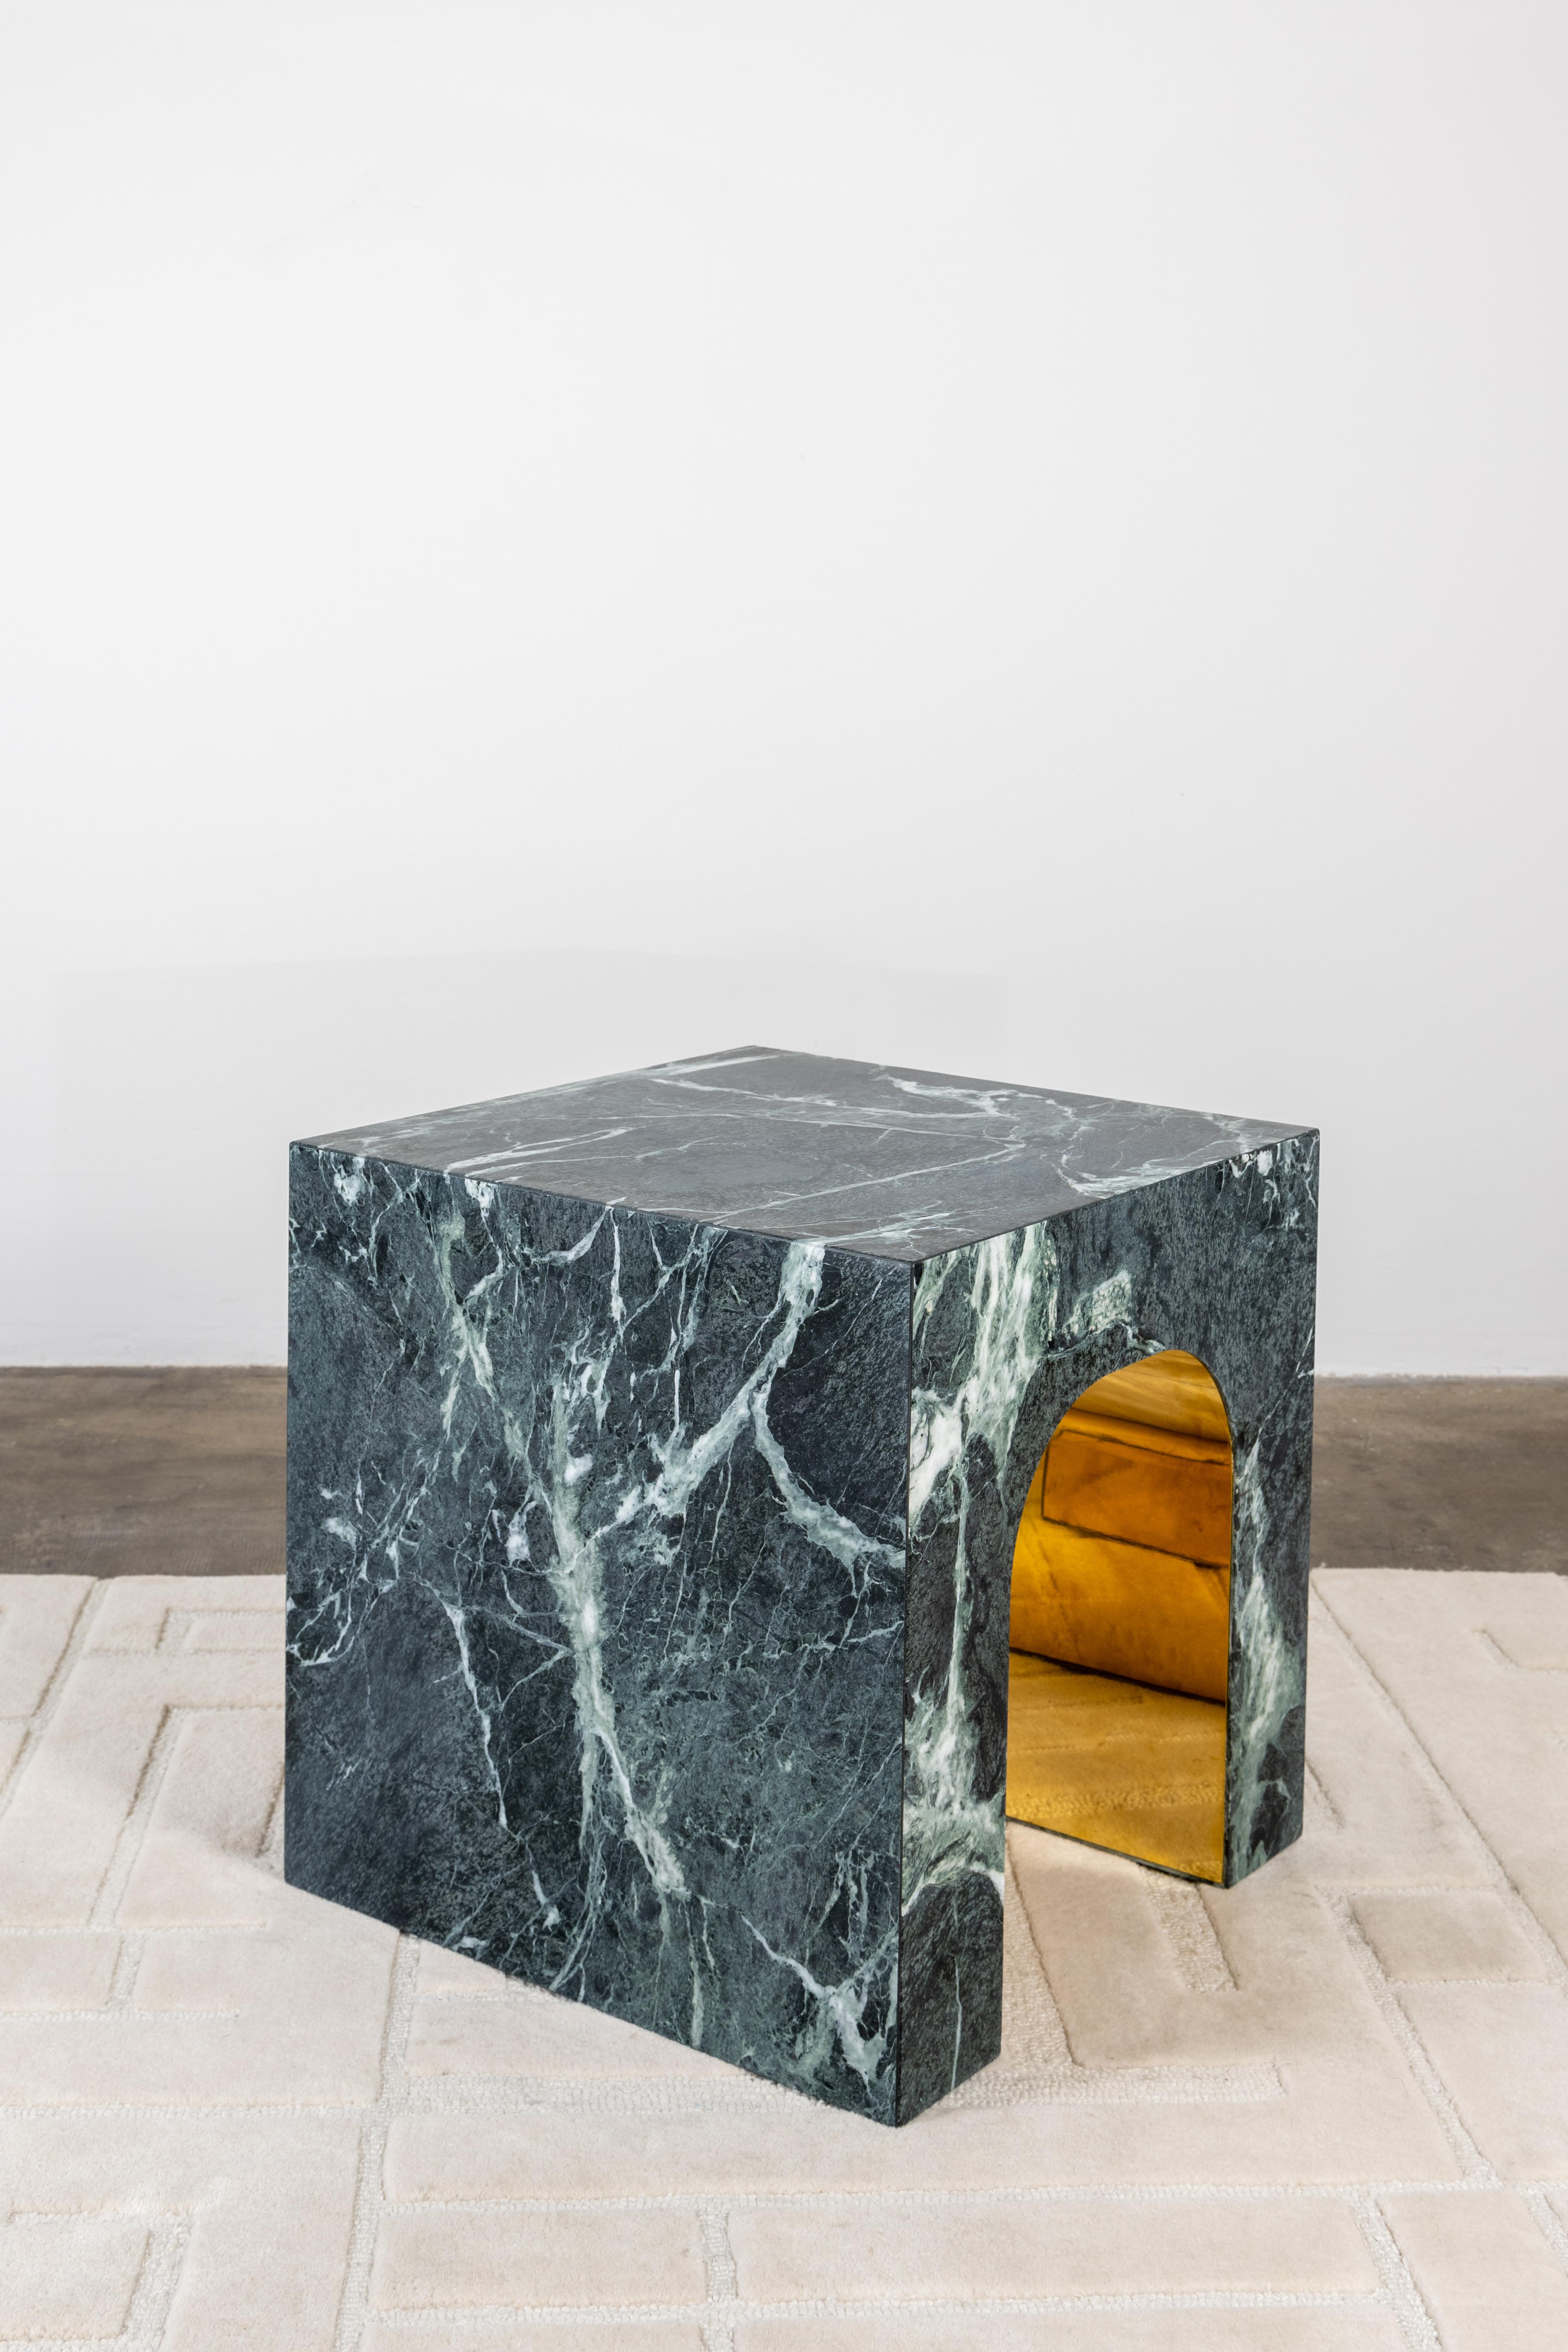 NU is Coffee table handmade in Italy of Marble Verde Alpi.
Strong, sturdy and quite charming. Nu can be anything you want.
Nu can create benches, tables, planters, shelves and may fill an entire room if you do want to be so wild.
You can be as